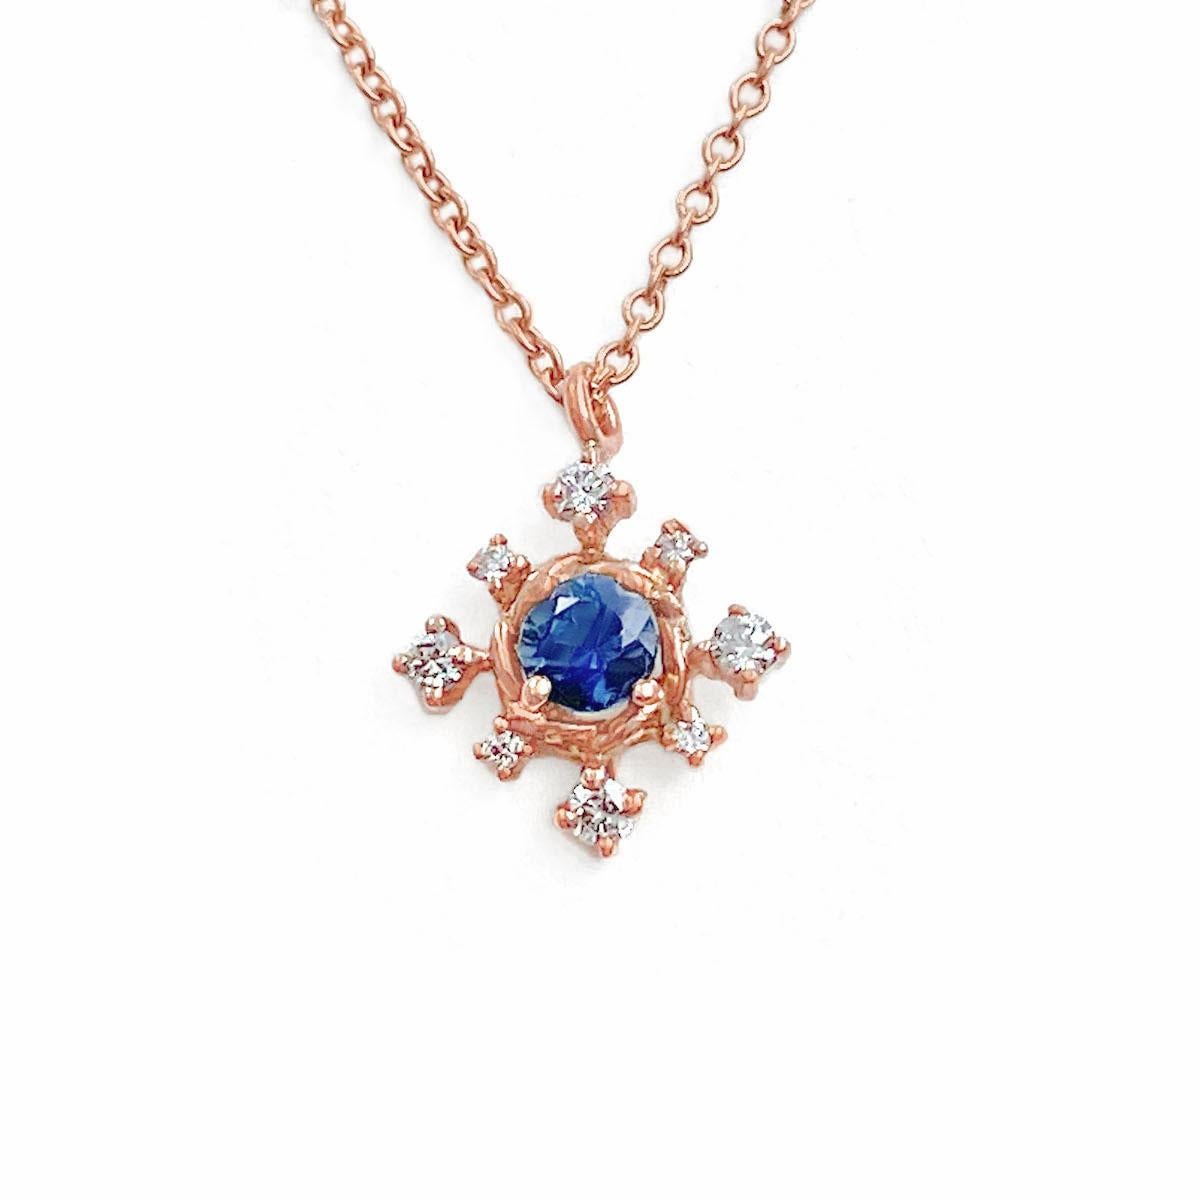 Dainty and exquisite Scilla blue sapphire and diamond star drop pendant necklace, showcasing a prong set 3.5mm round medium blue sapphire supported by JeweLyrie signature twist base that’s surrounded with 8 prong set 1.5mm and 1mm brilliant cut